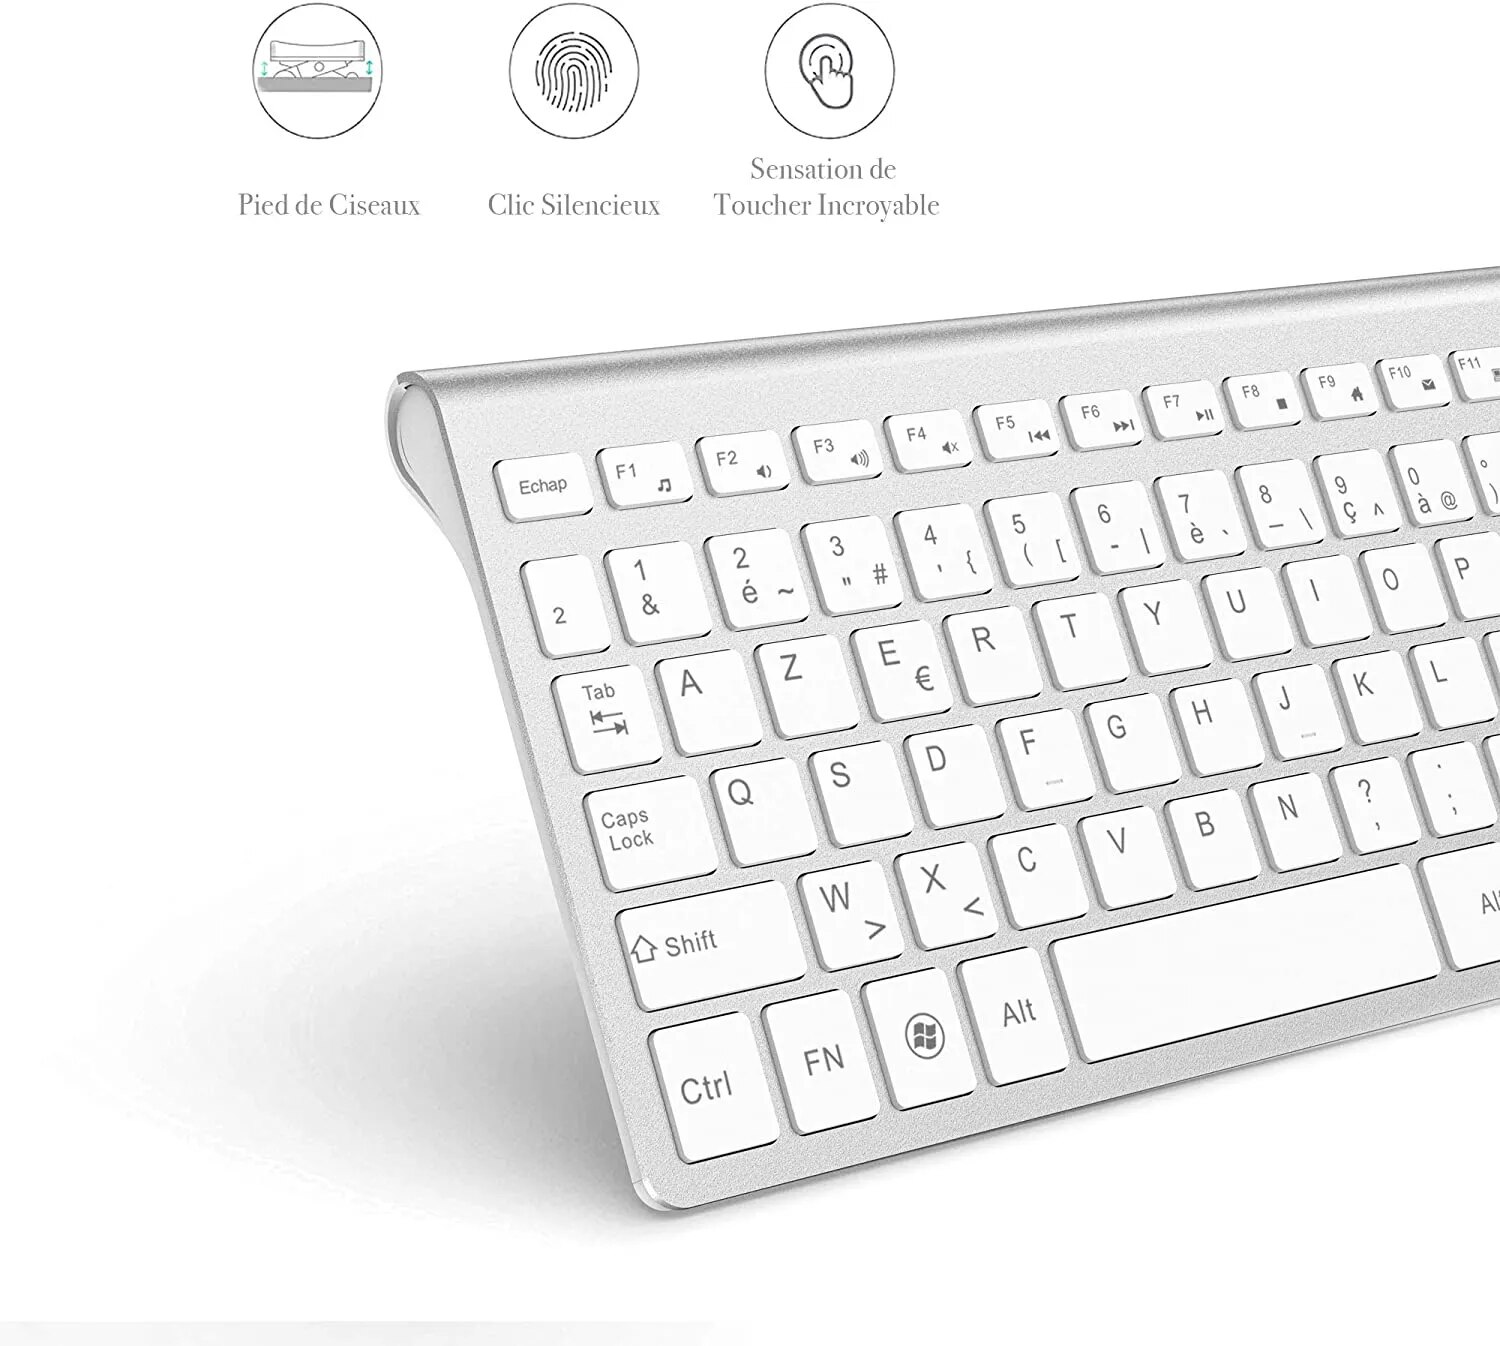 H3f118f50890c4f4f9462ba047b843168i French 2.4G Wireless Keyboard Mouse Compatible with iMac PC Laptop Tablet Computer Windows (Silver White)